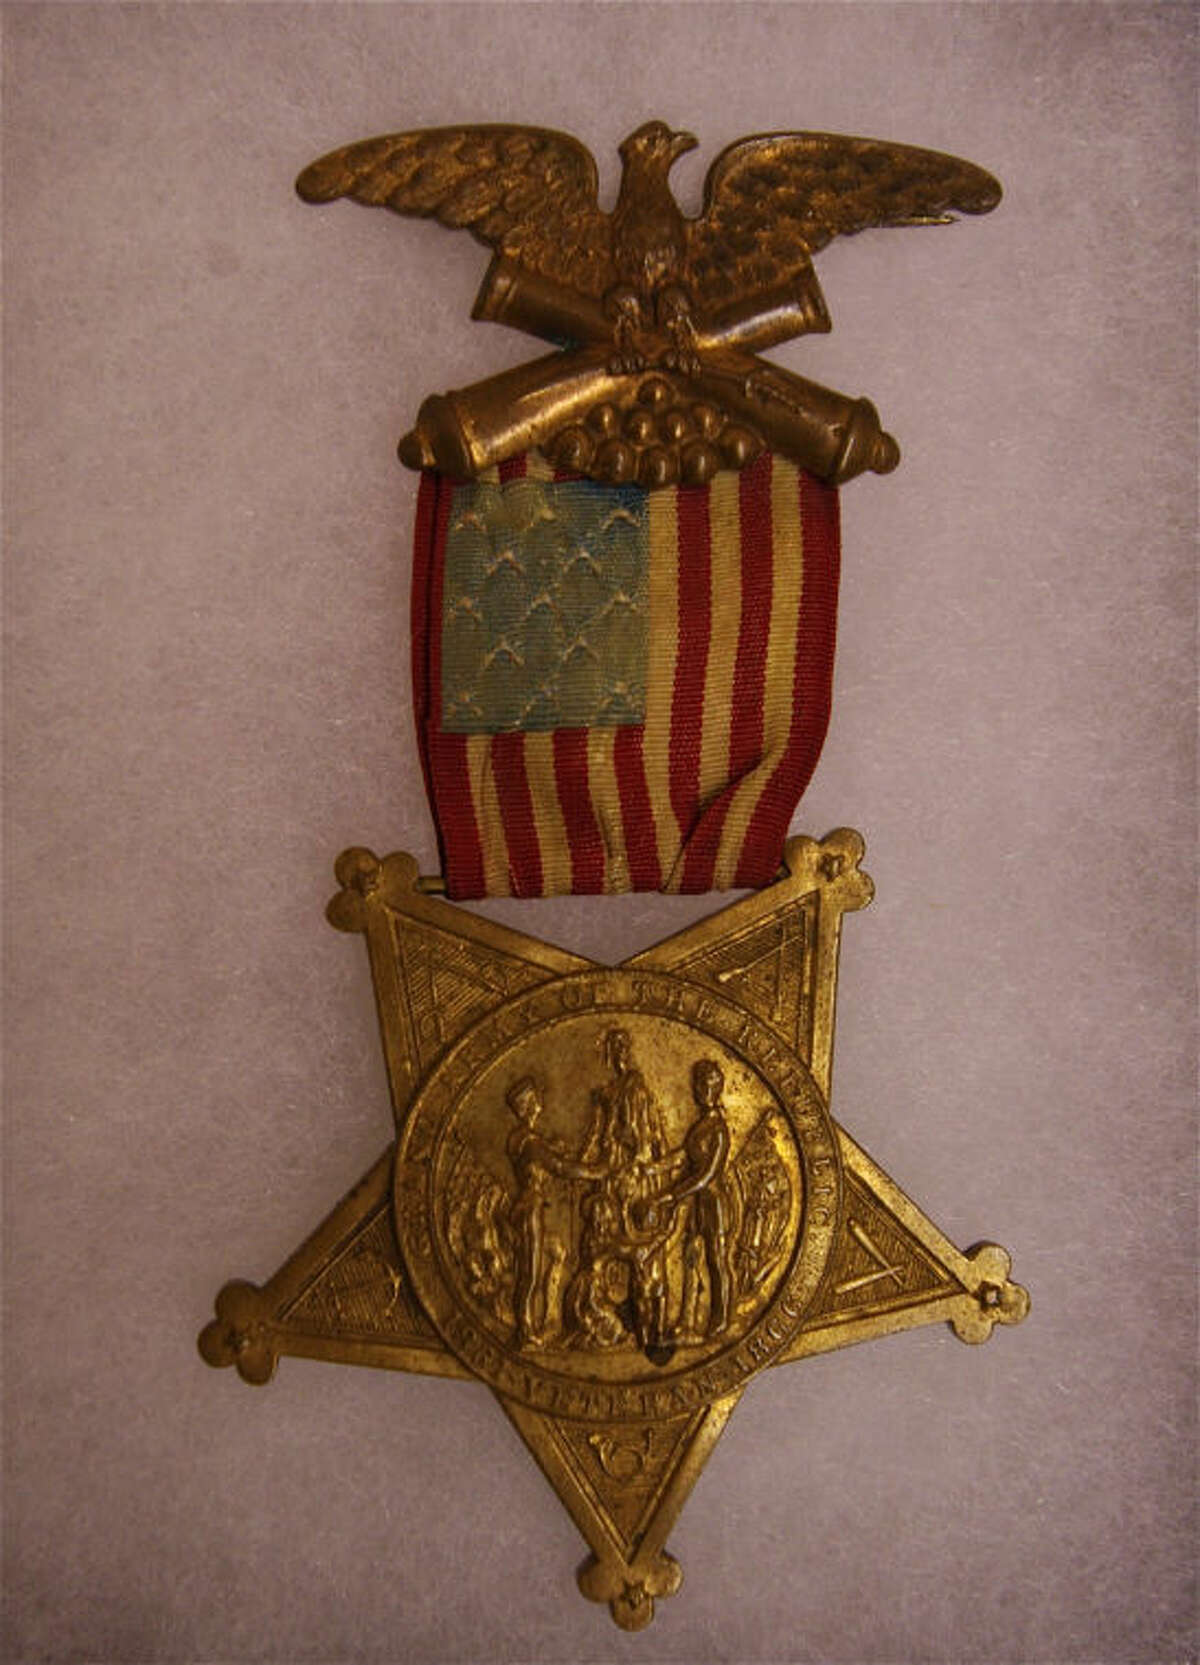 Stuart Frohm | for the Daily NewsA Midland resident is loaning this Grand Army of the Republic membership badge to the Midland County Historical Society for a Civil War exhibit. The Grand Army of the Republic had posts in Midland County.